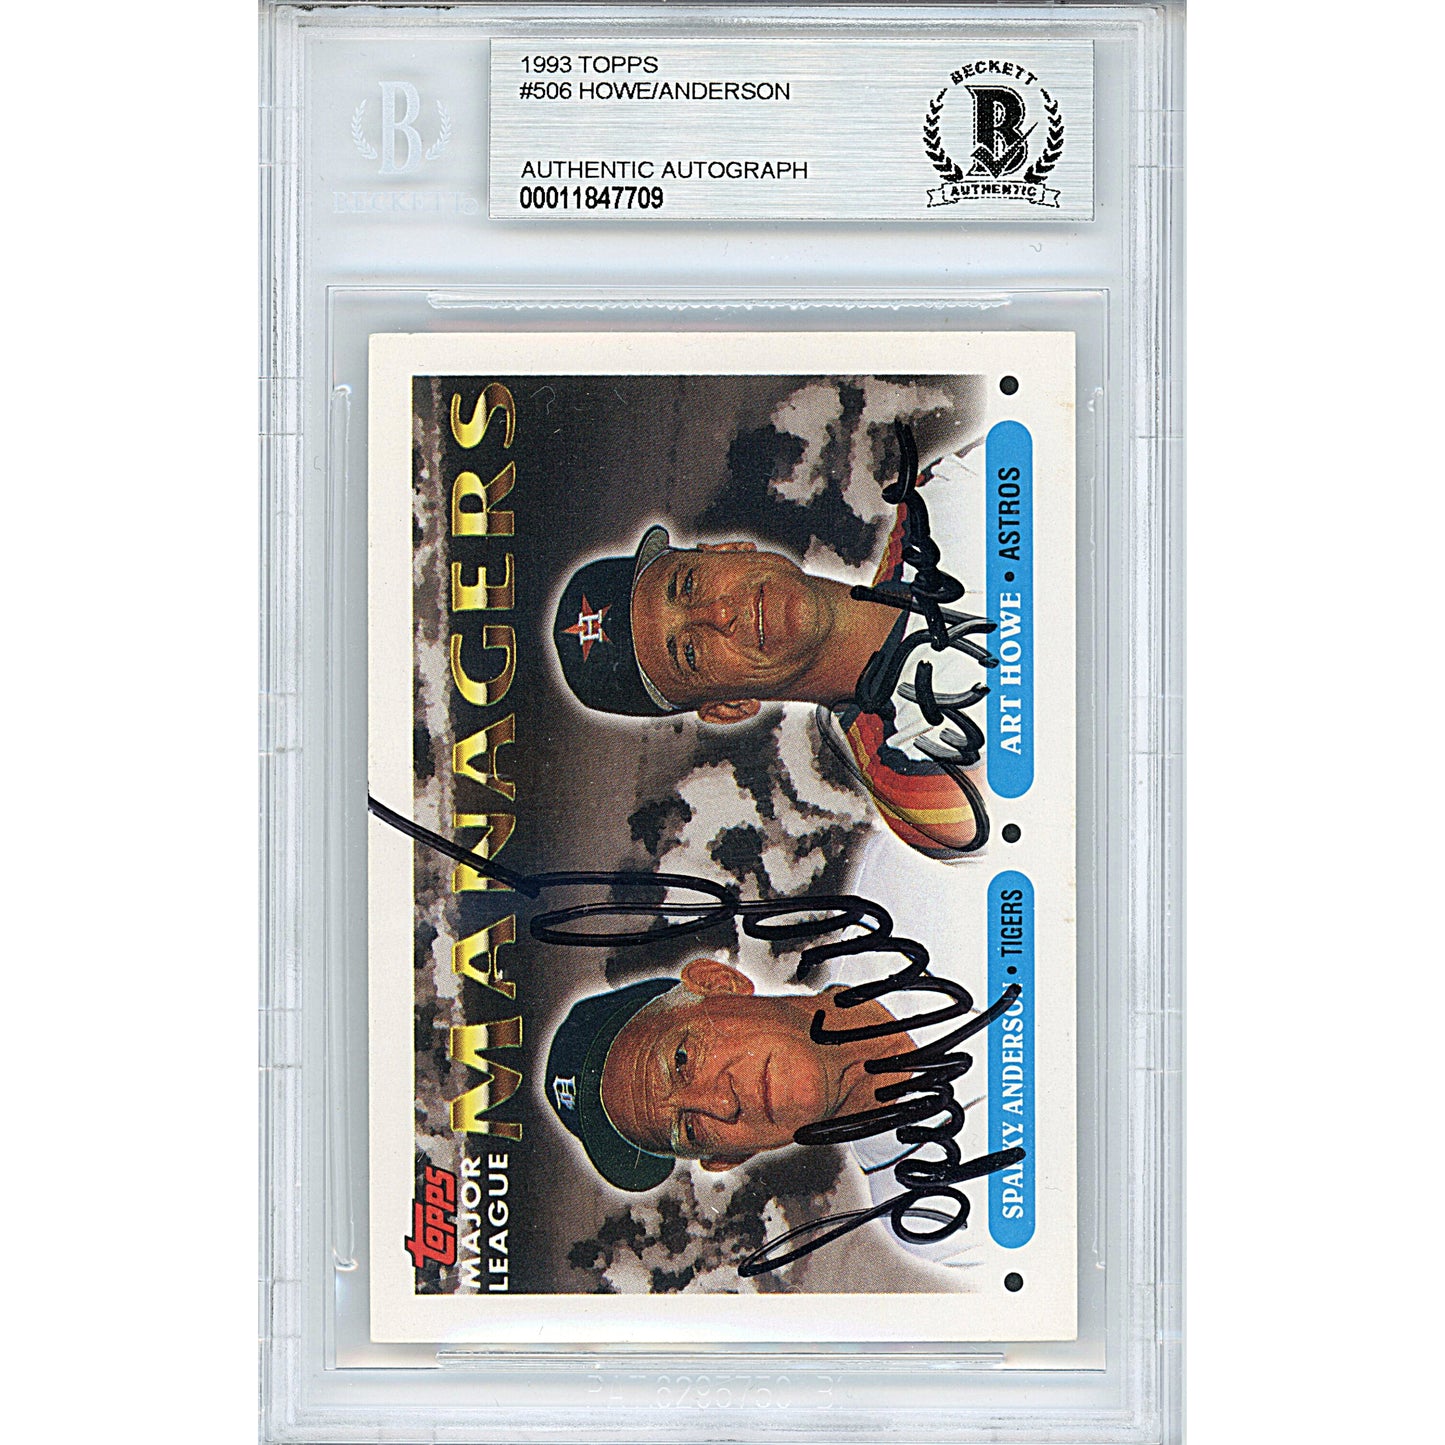 Baseballs- Autographed- Art Howe and Sparky Anderson Signed 1993 Topps Major League Managers Base Set Baseball Trading Card - Houston Astros - Detroit Tigers - Beckett BGS BAS Slabbed - Encapsulated 00011847709 - 102